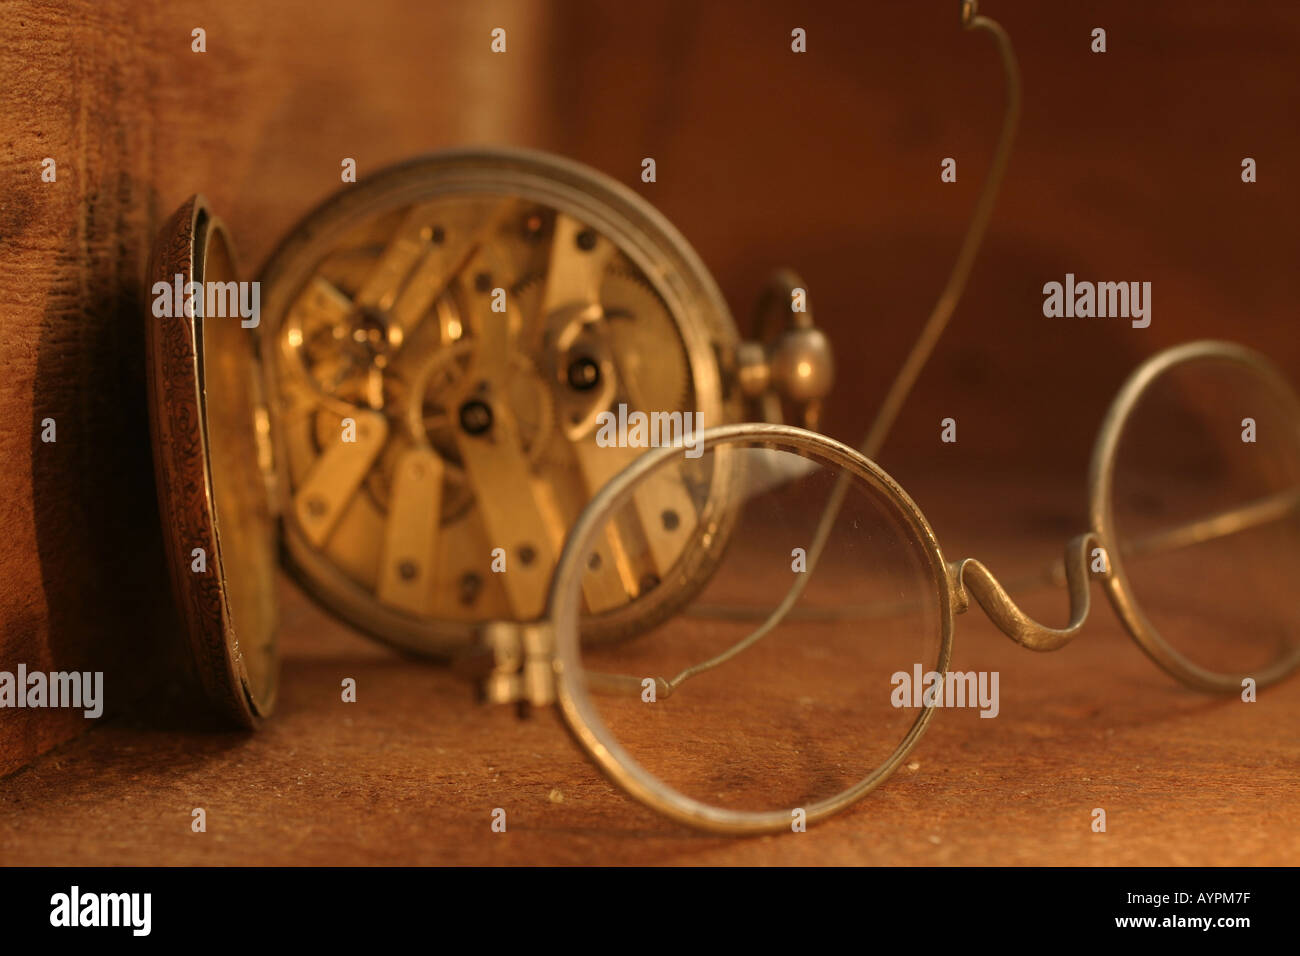 A pocket watch placed beside the glasses Stock Photo